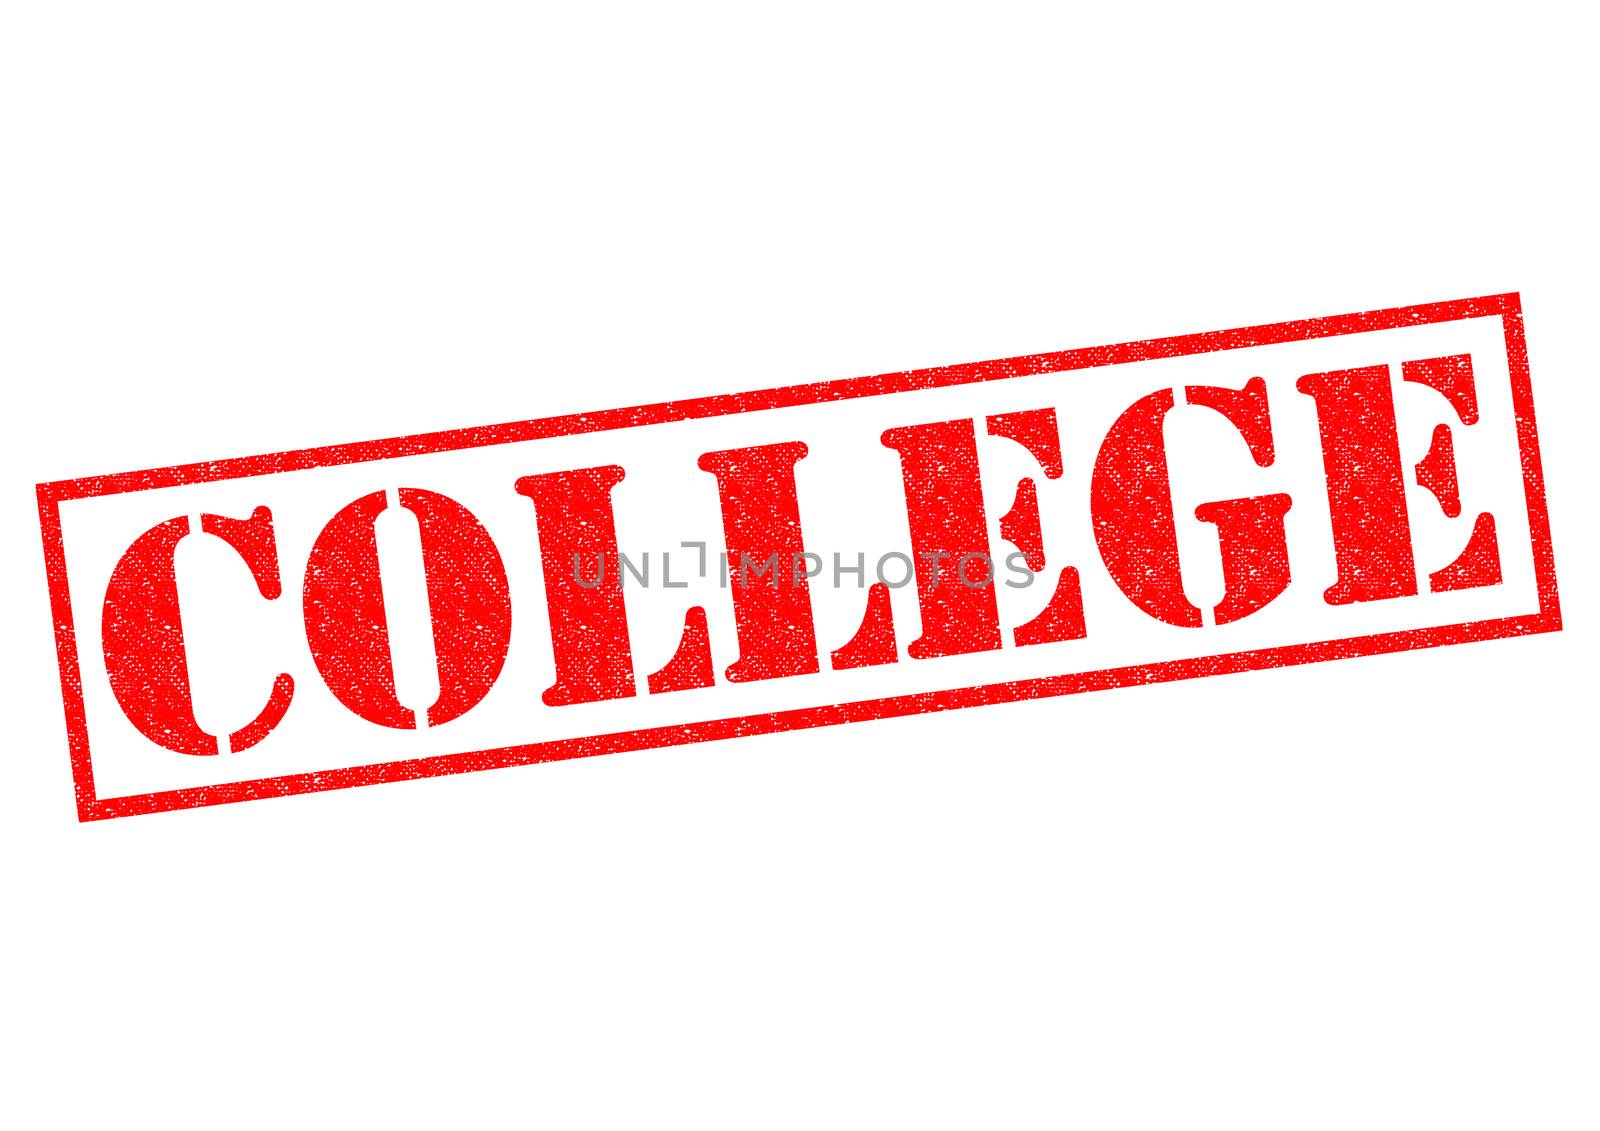 COLLEGE red Rubber Stamp over a white background.